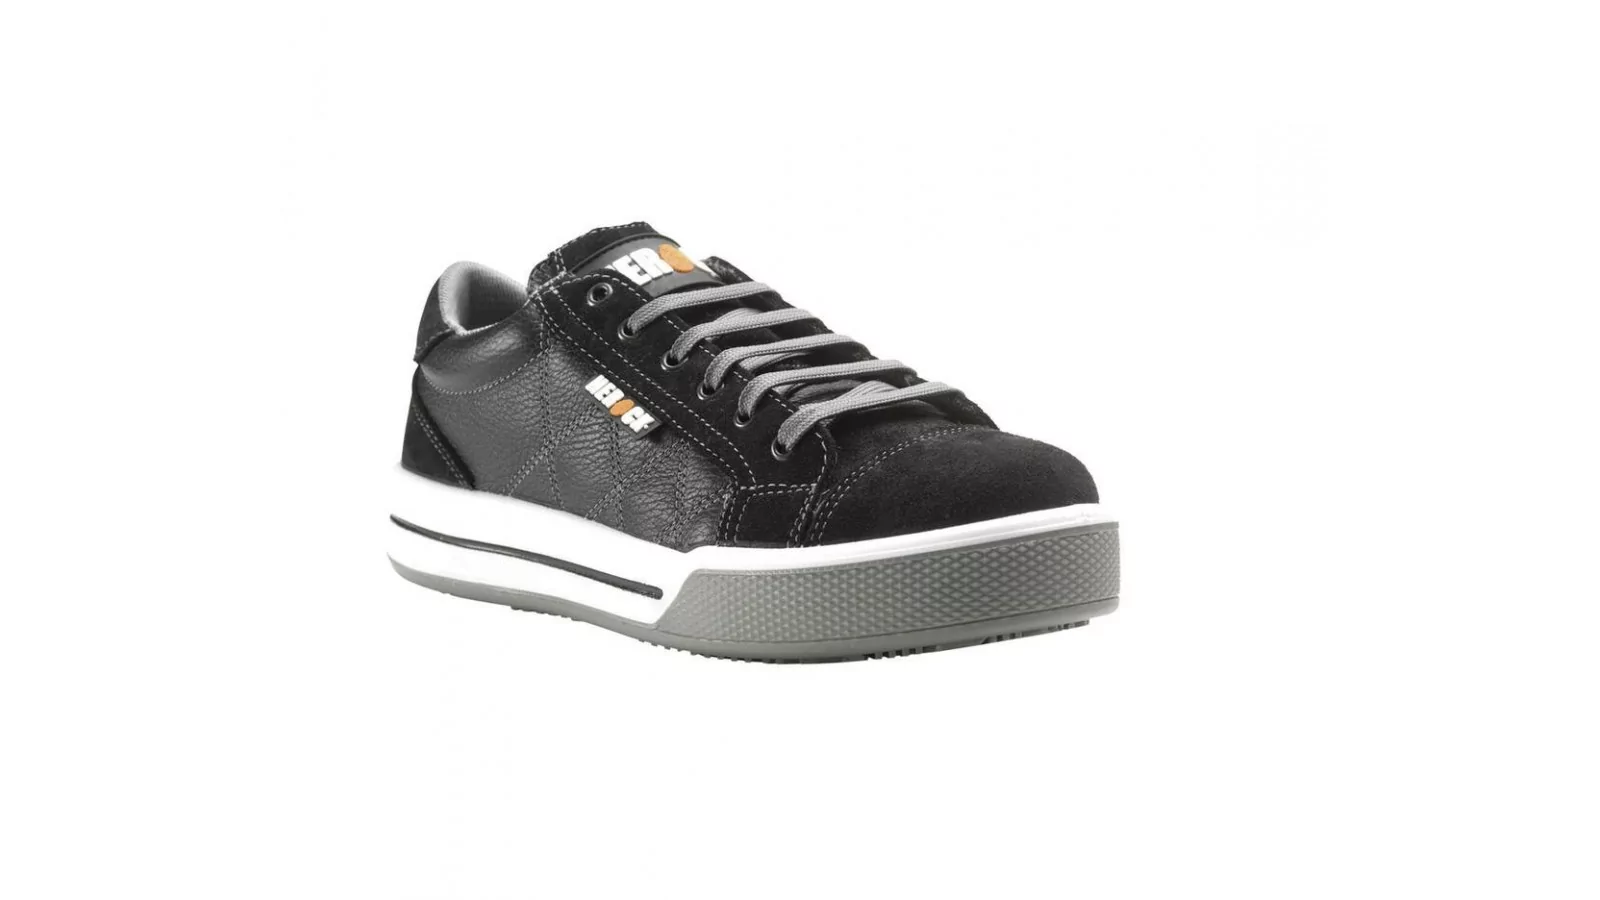 Chaussures basses sneakers S3